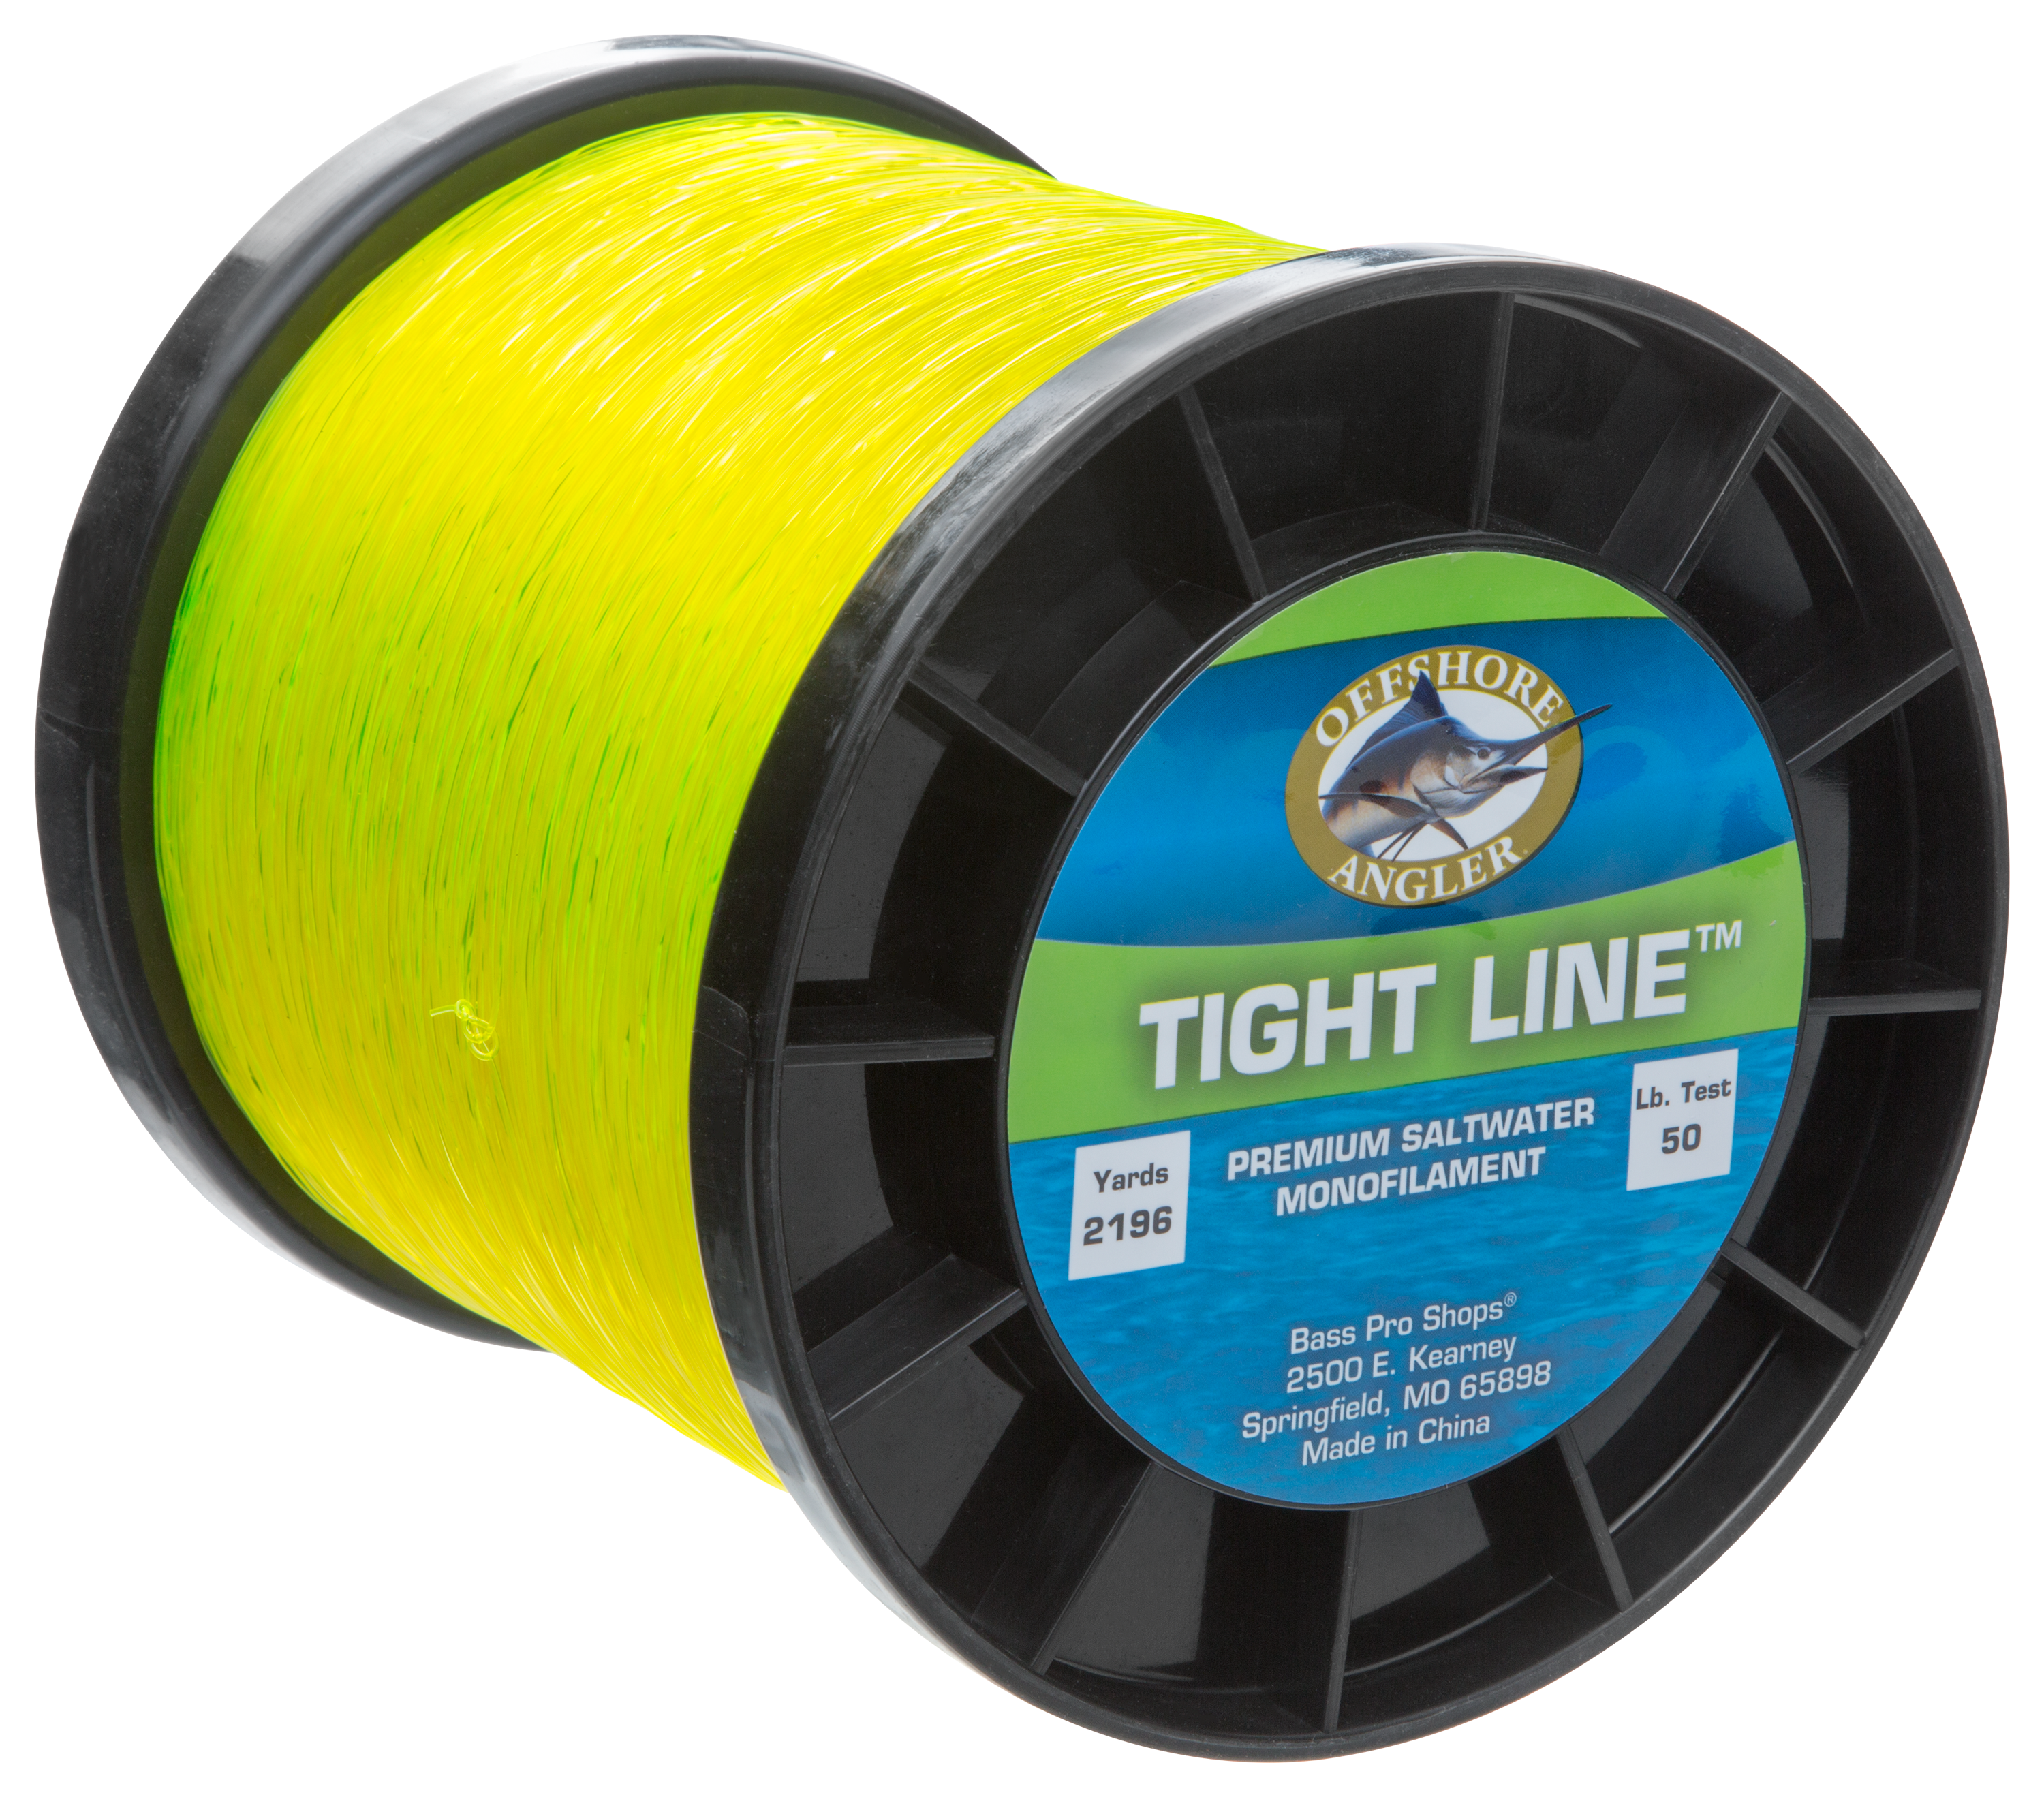  Ande Monofilament Line (Clear, 12 -Pounds Test, 1/4# Spool) :  Monofilament Fishing Line : Sports & Outdoors